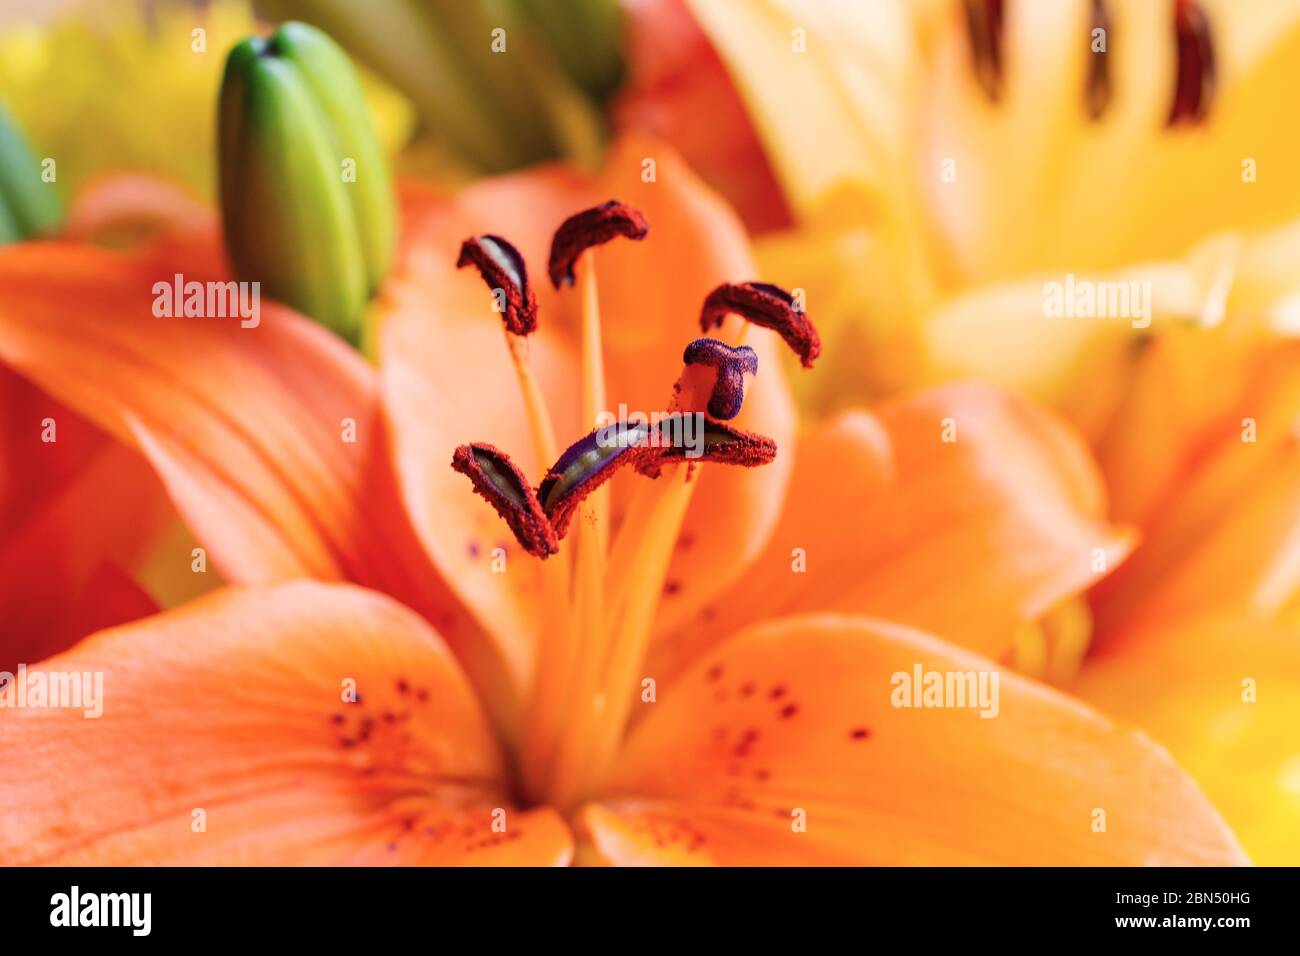 Close up view of the center of an orange lily.  Additional lillies blurred in the background. Stock Photo